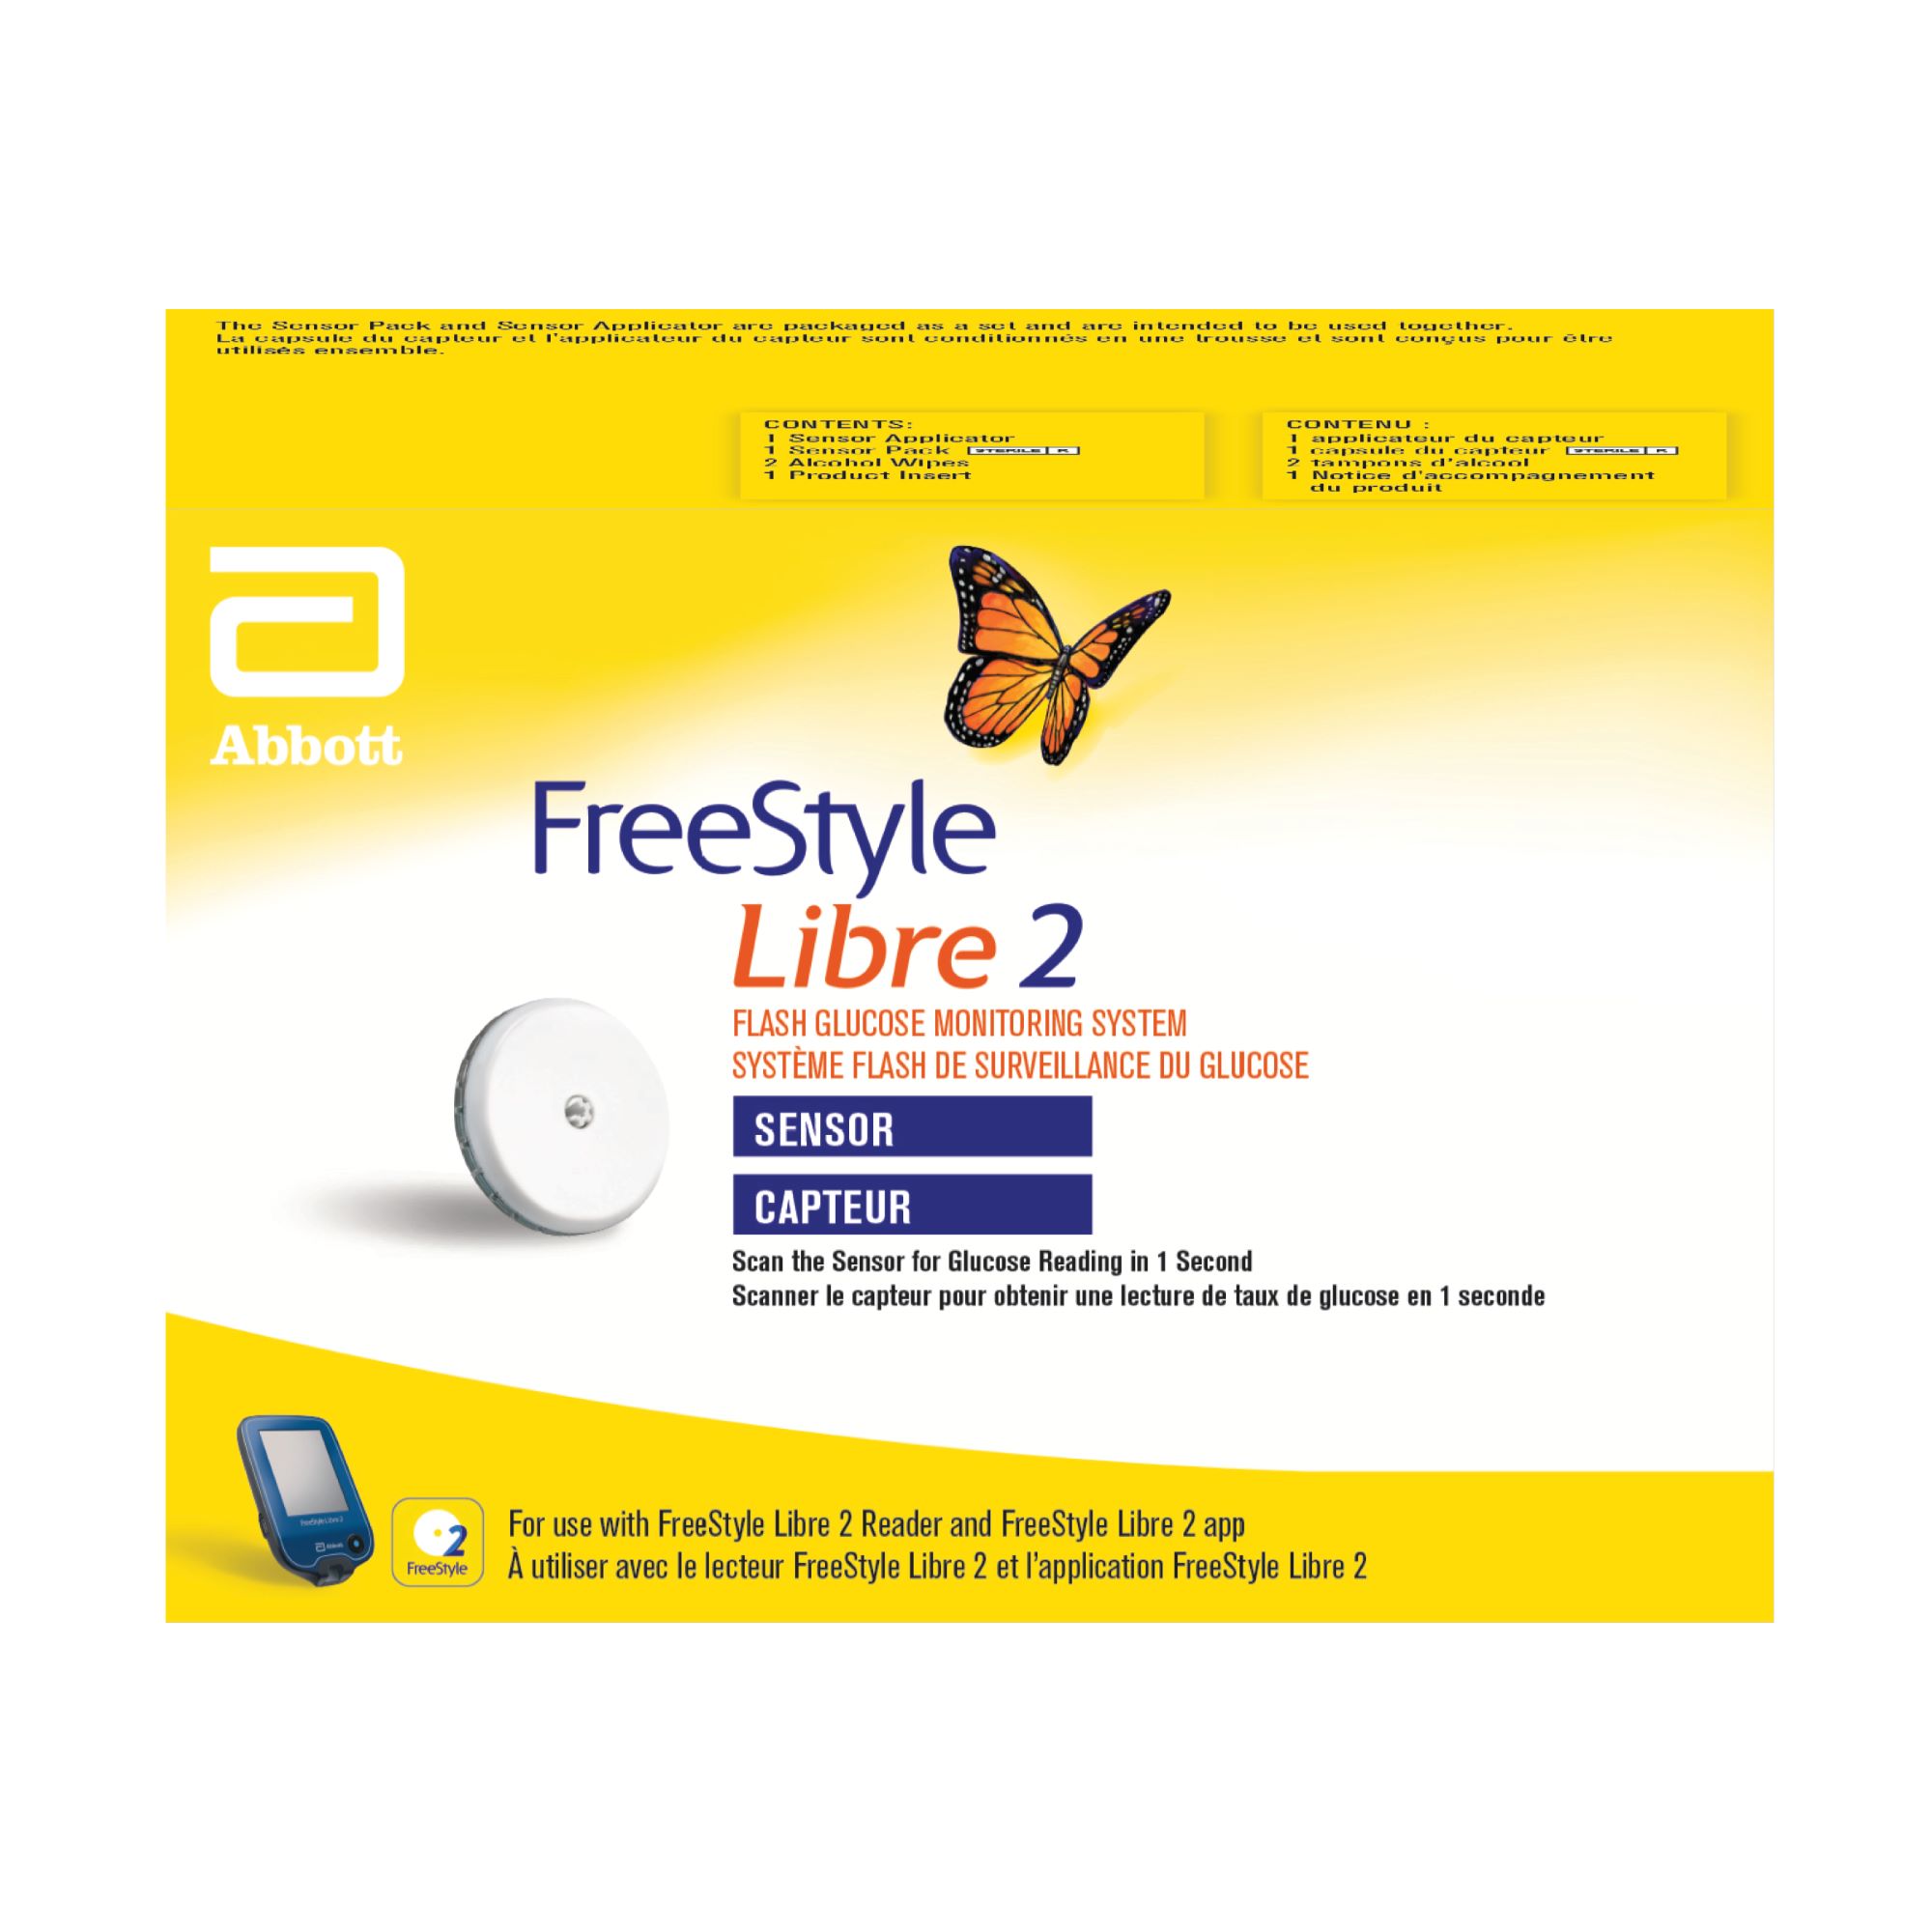 Experience Freedom with FreeStyle Libre 2 Sensor.